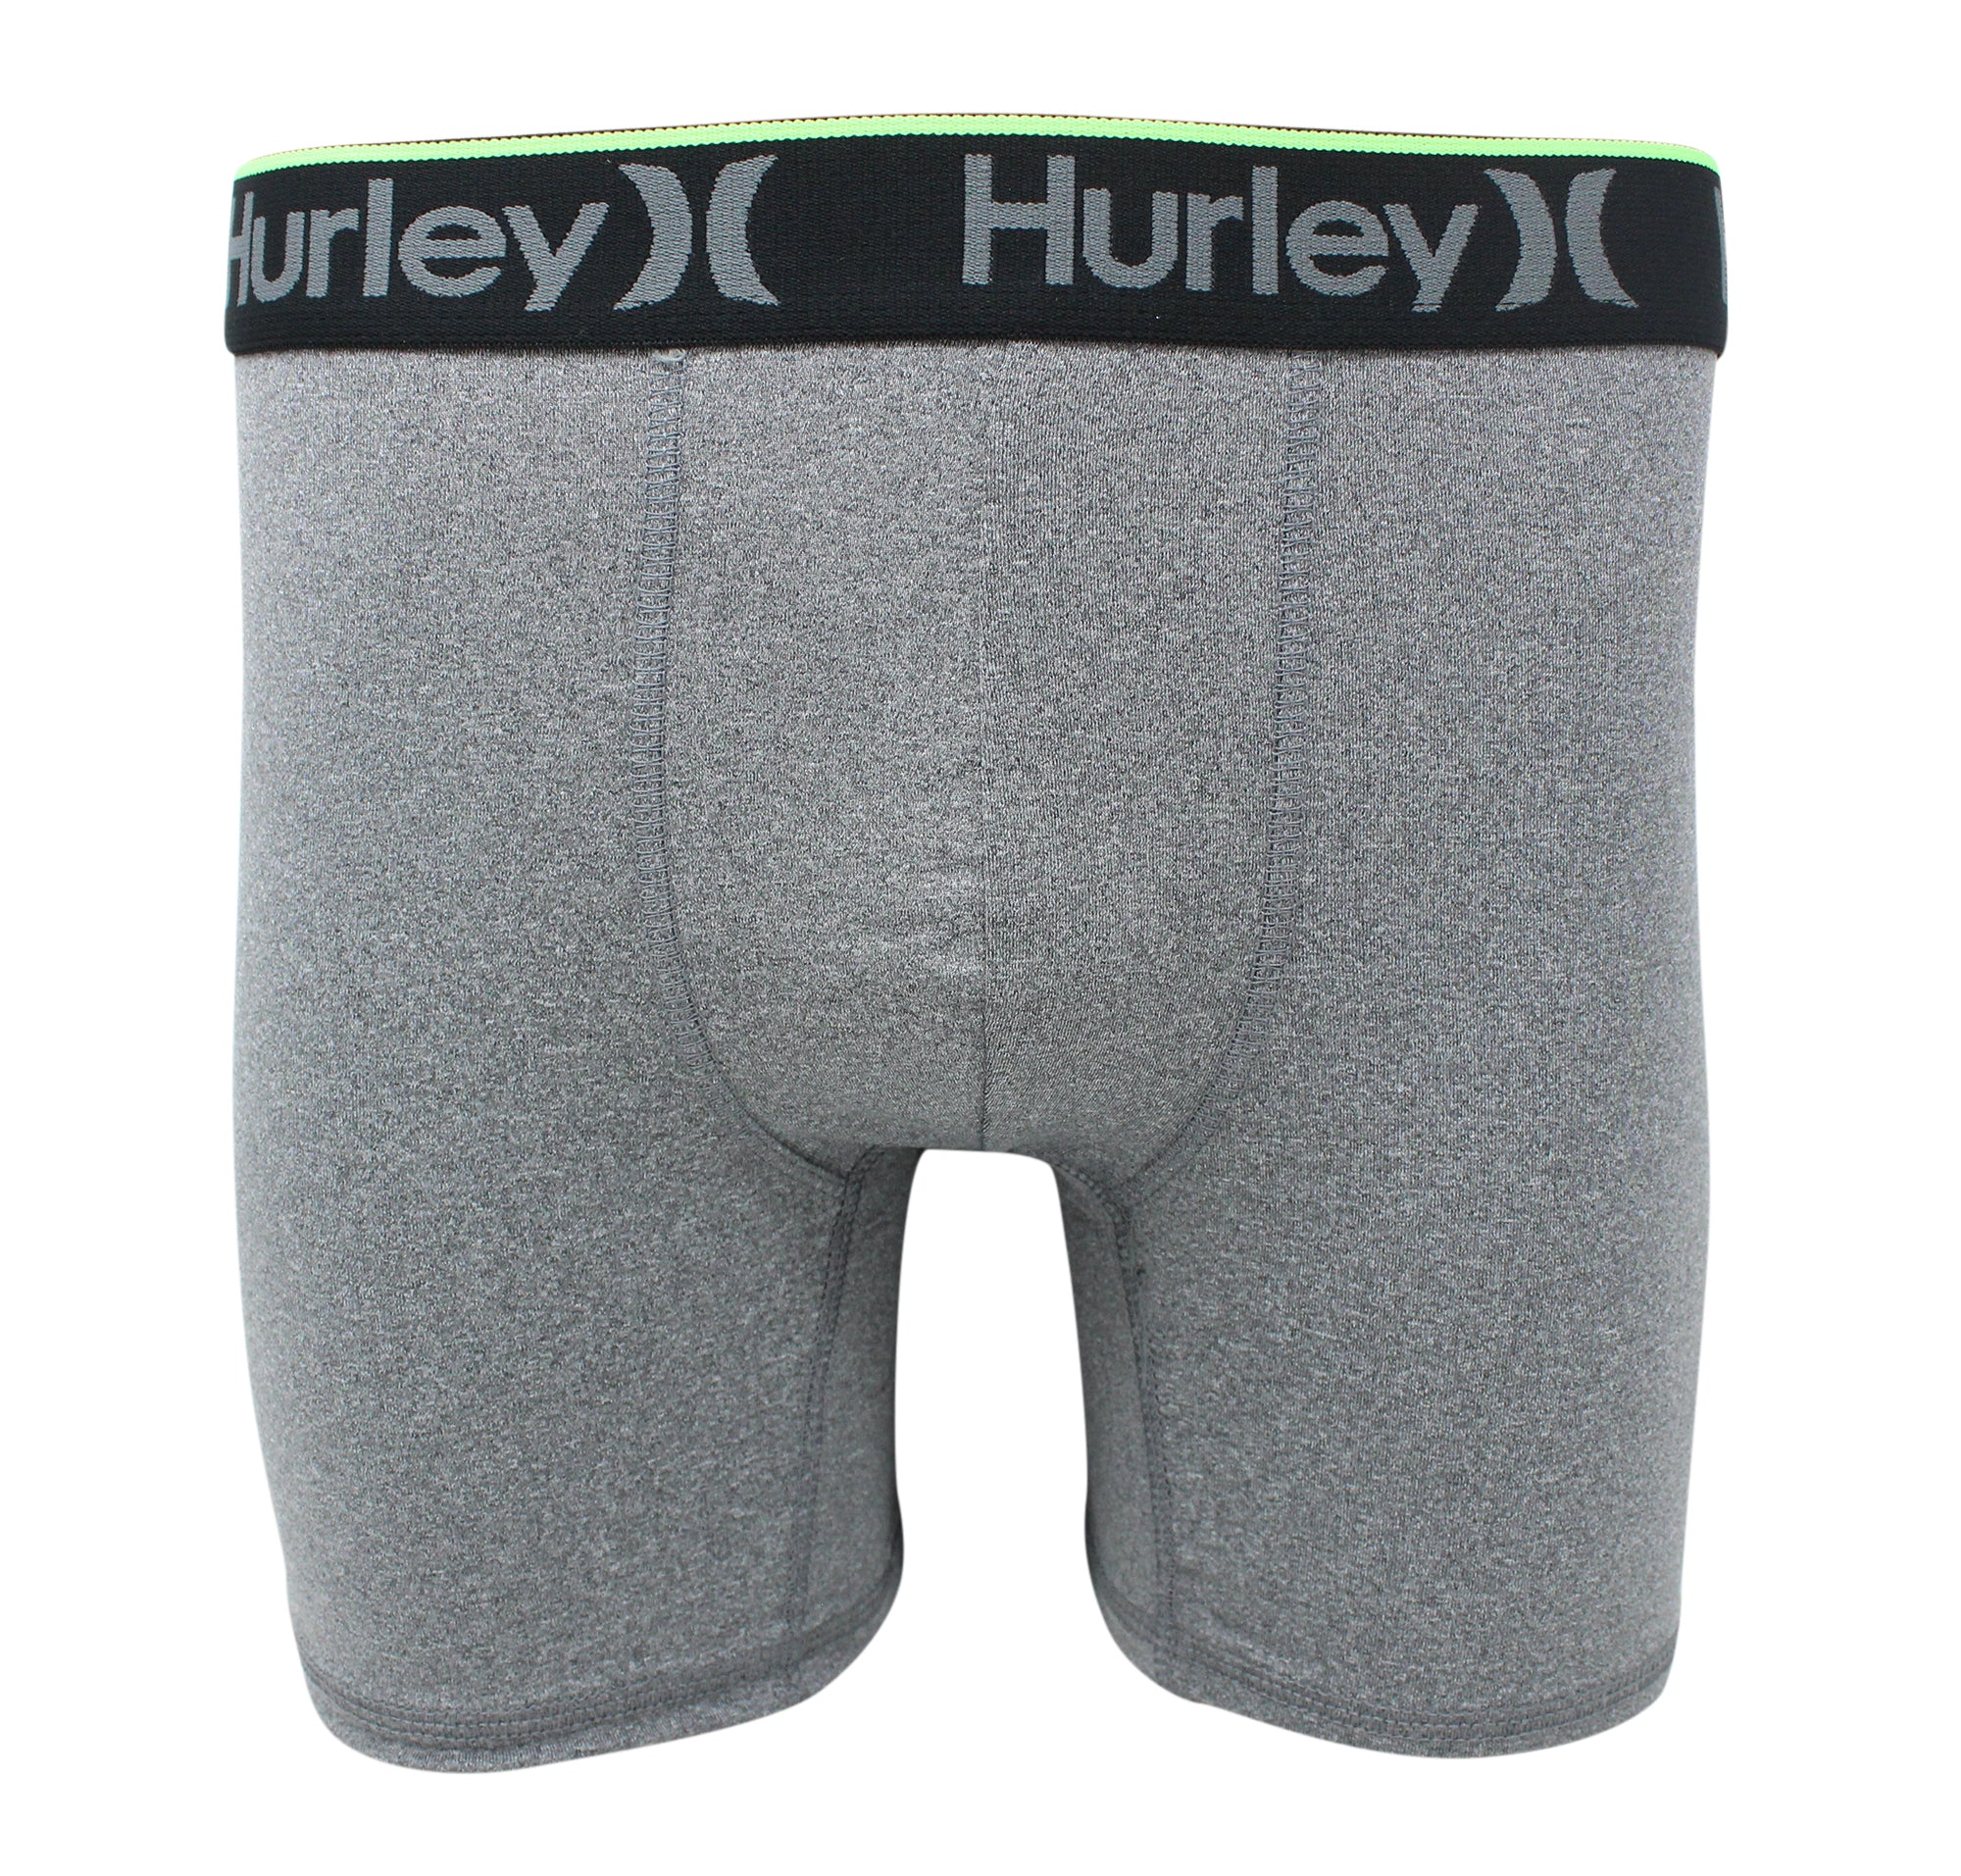 Hurley, Underwear & Socks, Nwt Hurley Mens 3 Pack Boxer Briefs Size L